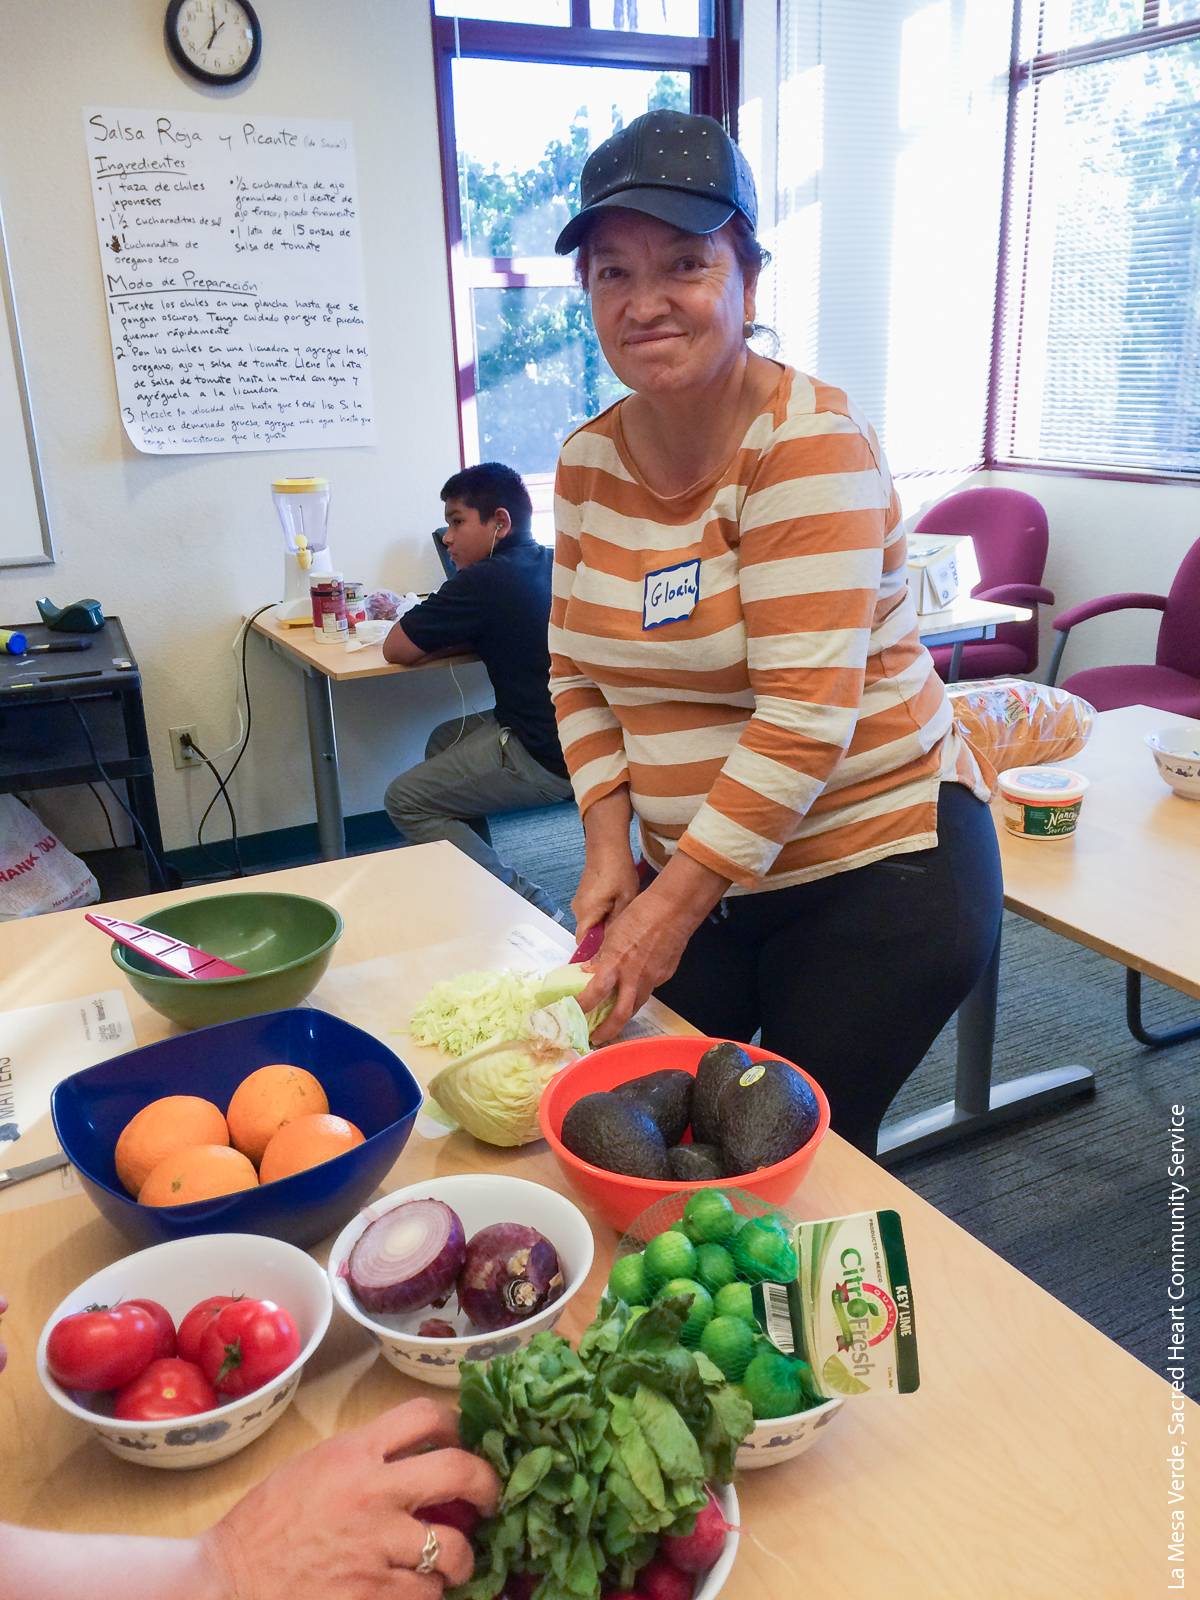 The LMV program offers cooking classes to help participants learn how to prepare and cook a meal using produce grown in their gardens.